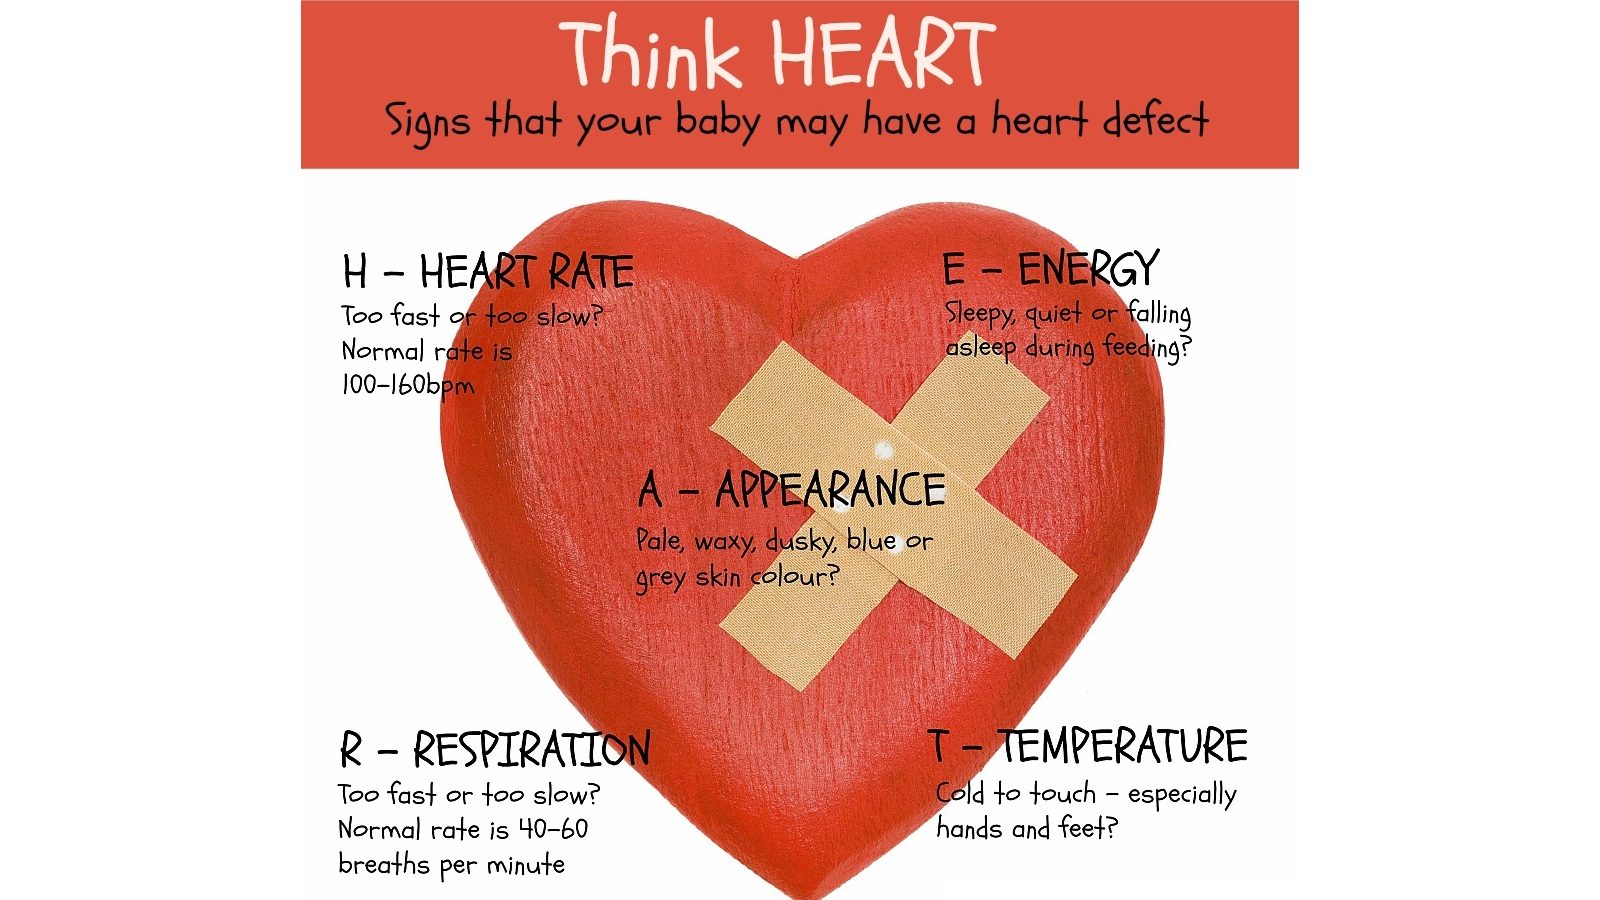 An infographic summarising the different signs that your baby might have a heart defect. H - heart rate (too fast or too slow?) E - energy (sleepy, quiet or falling asleep during feeding?) A - appearance (pale, waxy, dusky, blue or grey skin colour?), R - respiration (too fast or too slow?) and T - temperature (cold to touch - especially hands and feet?)